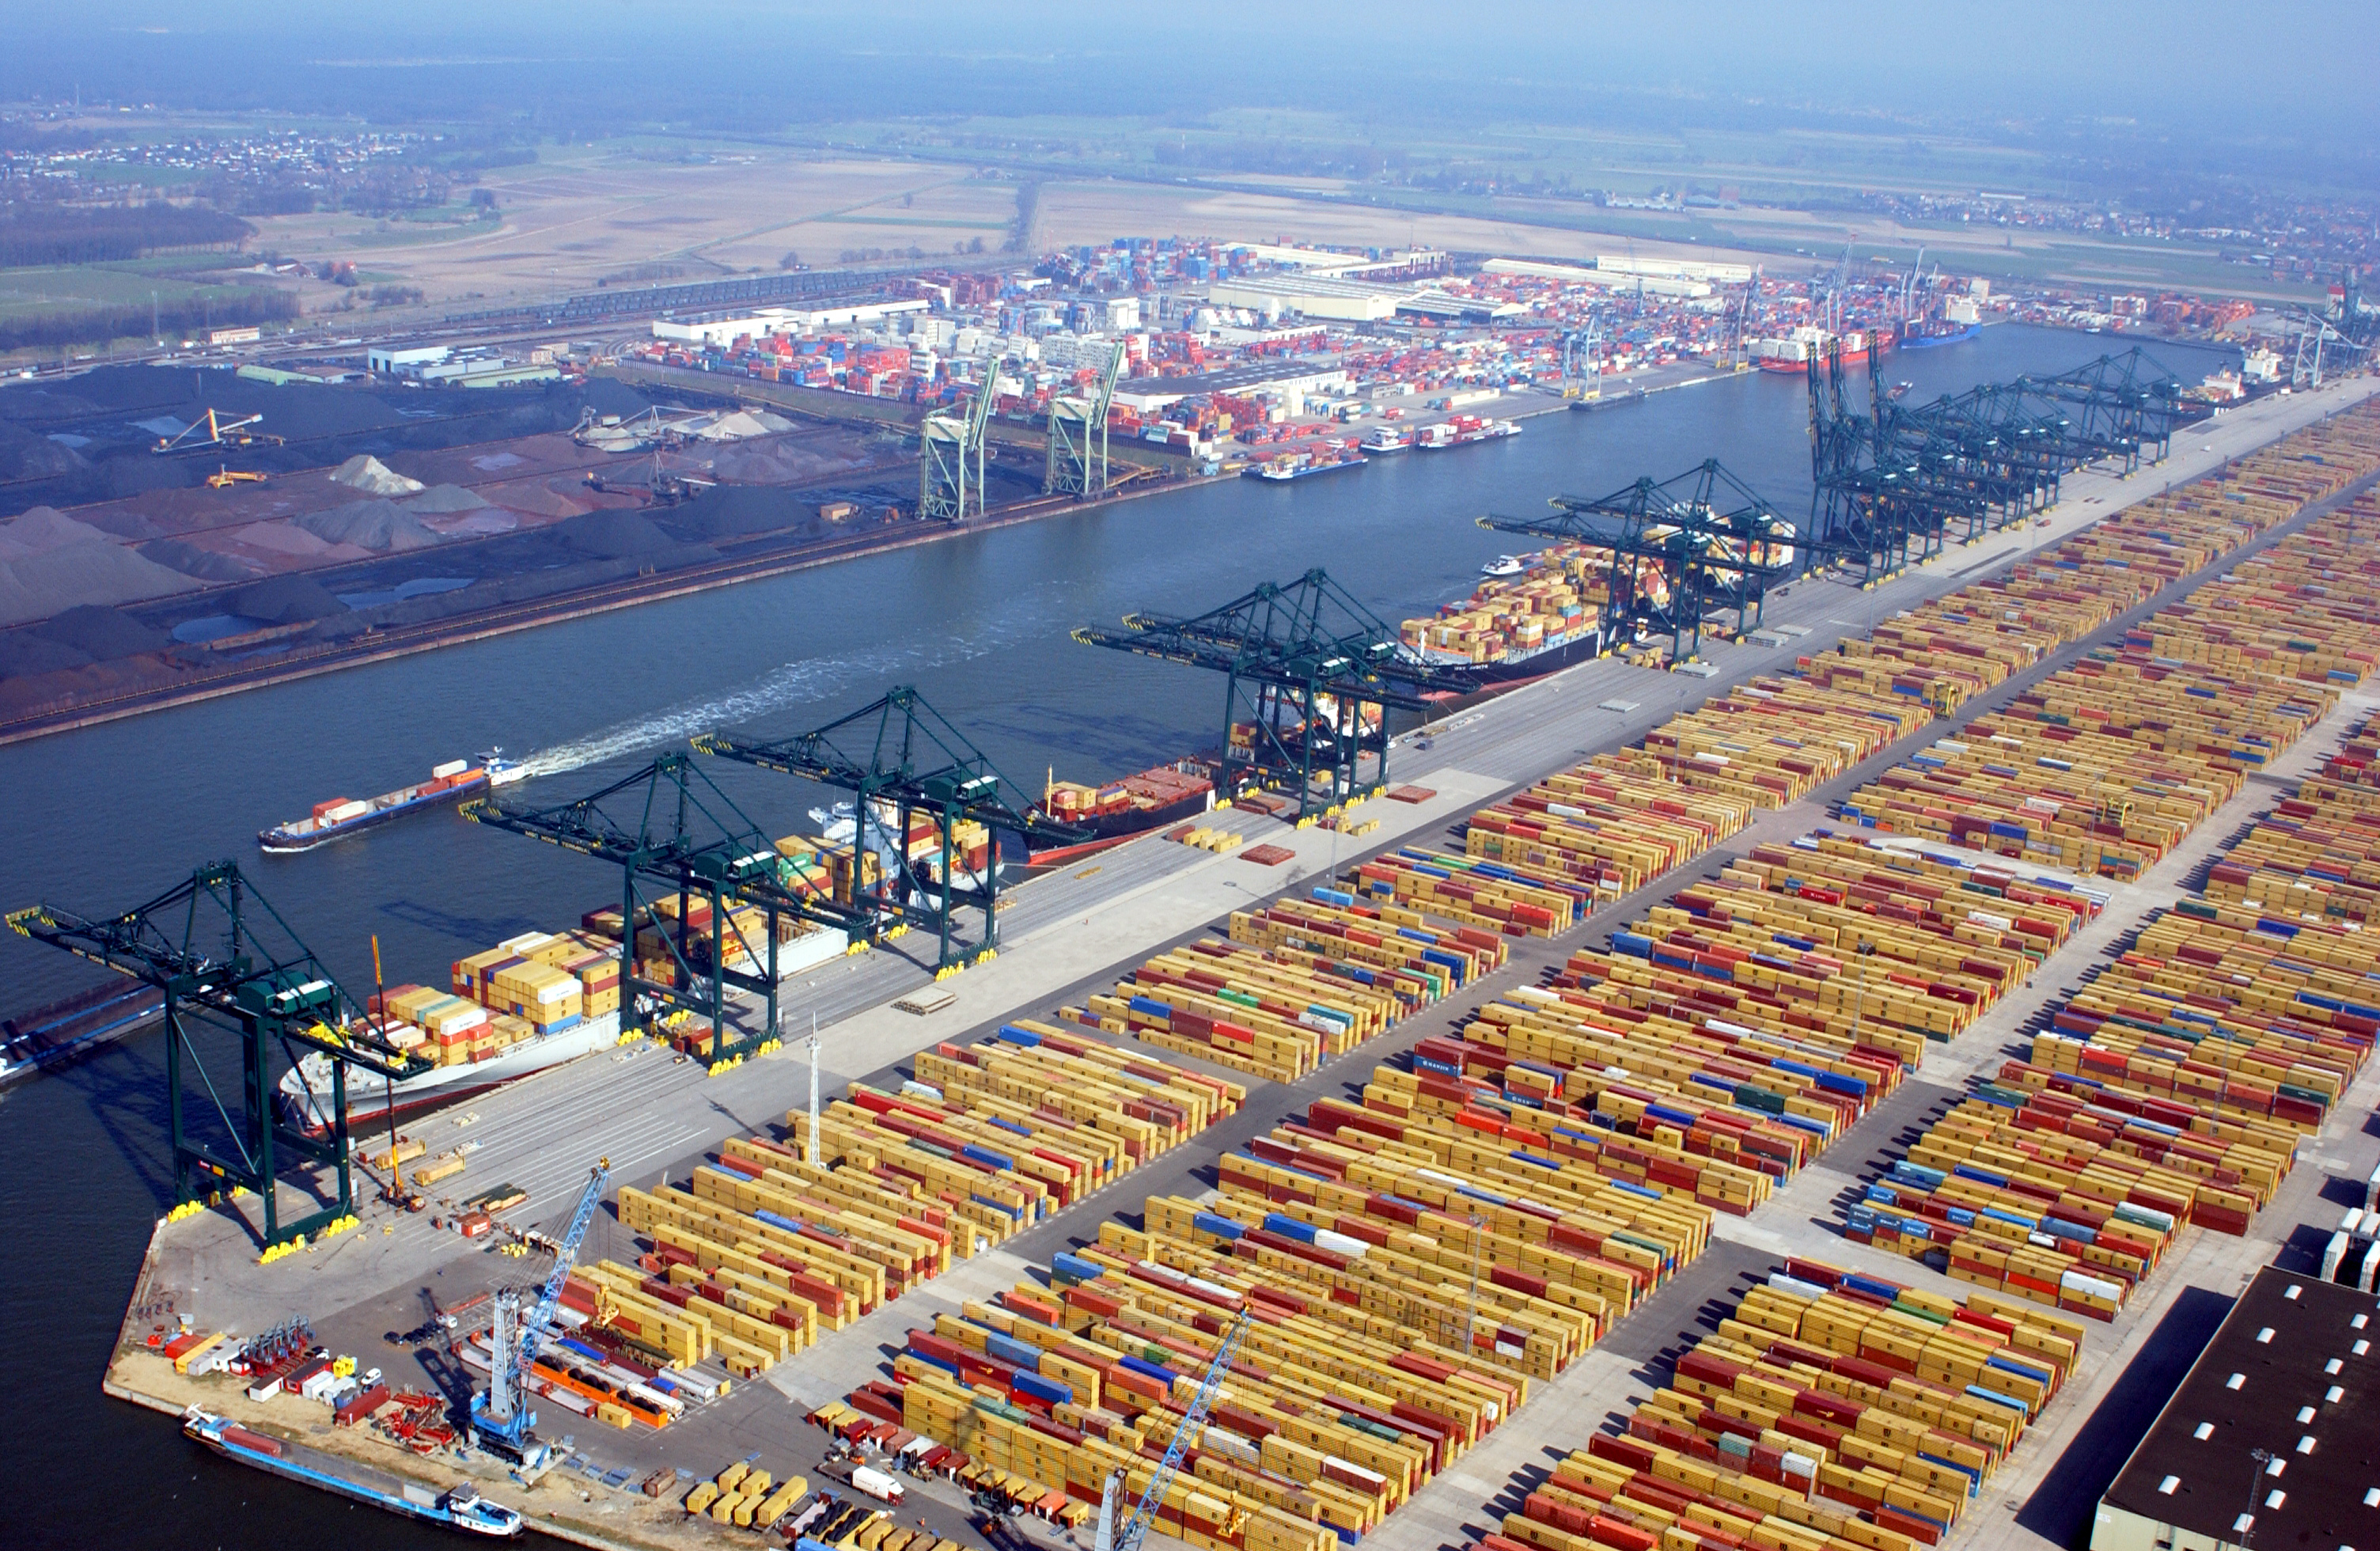 The Port of Antwerp becomes Europe's second-busiest box port